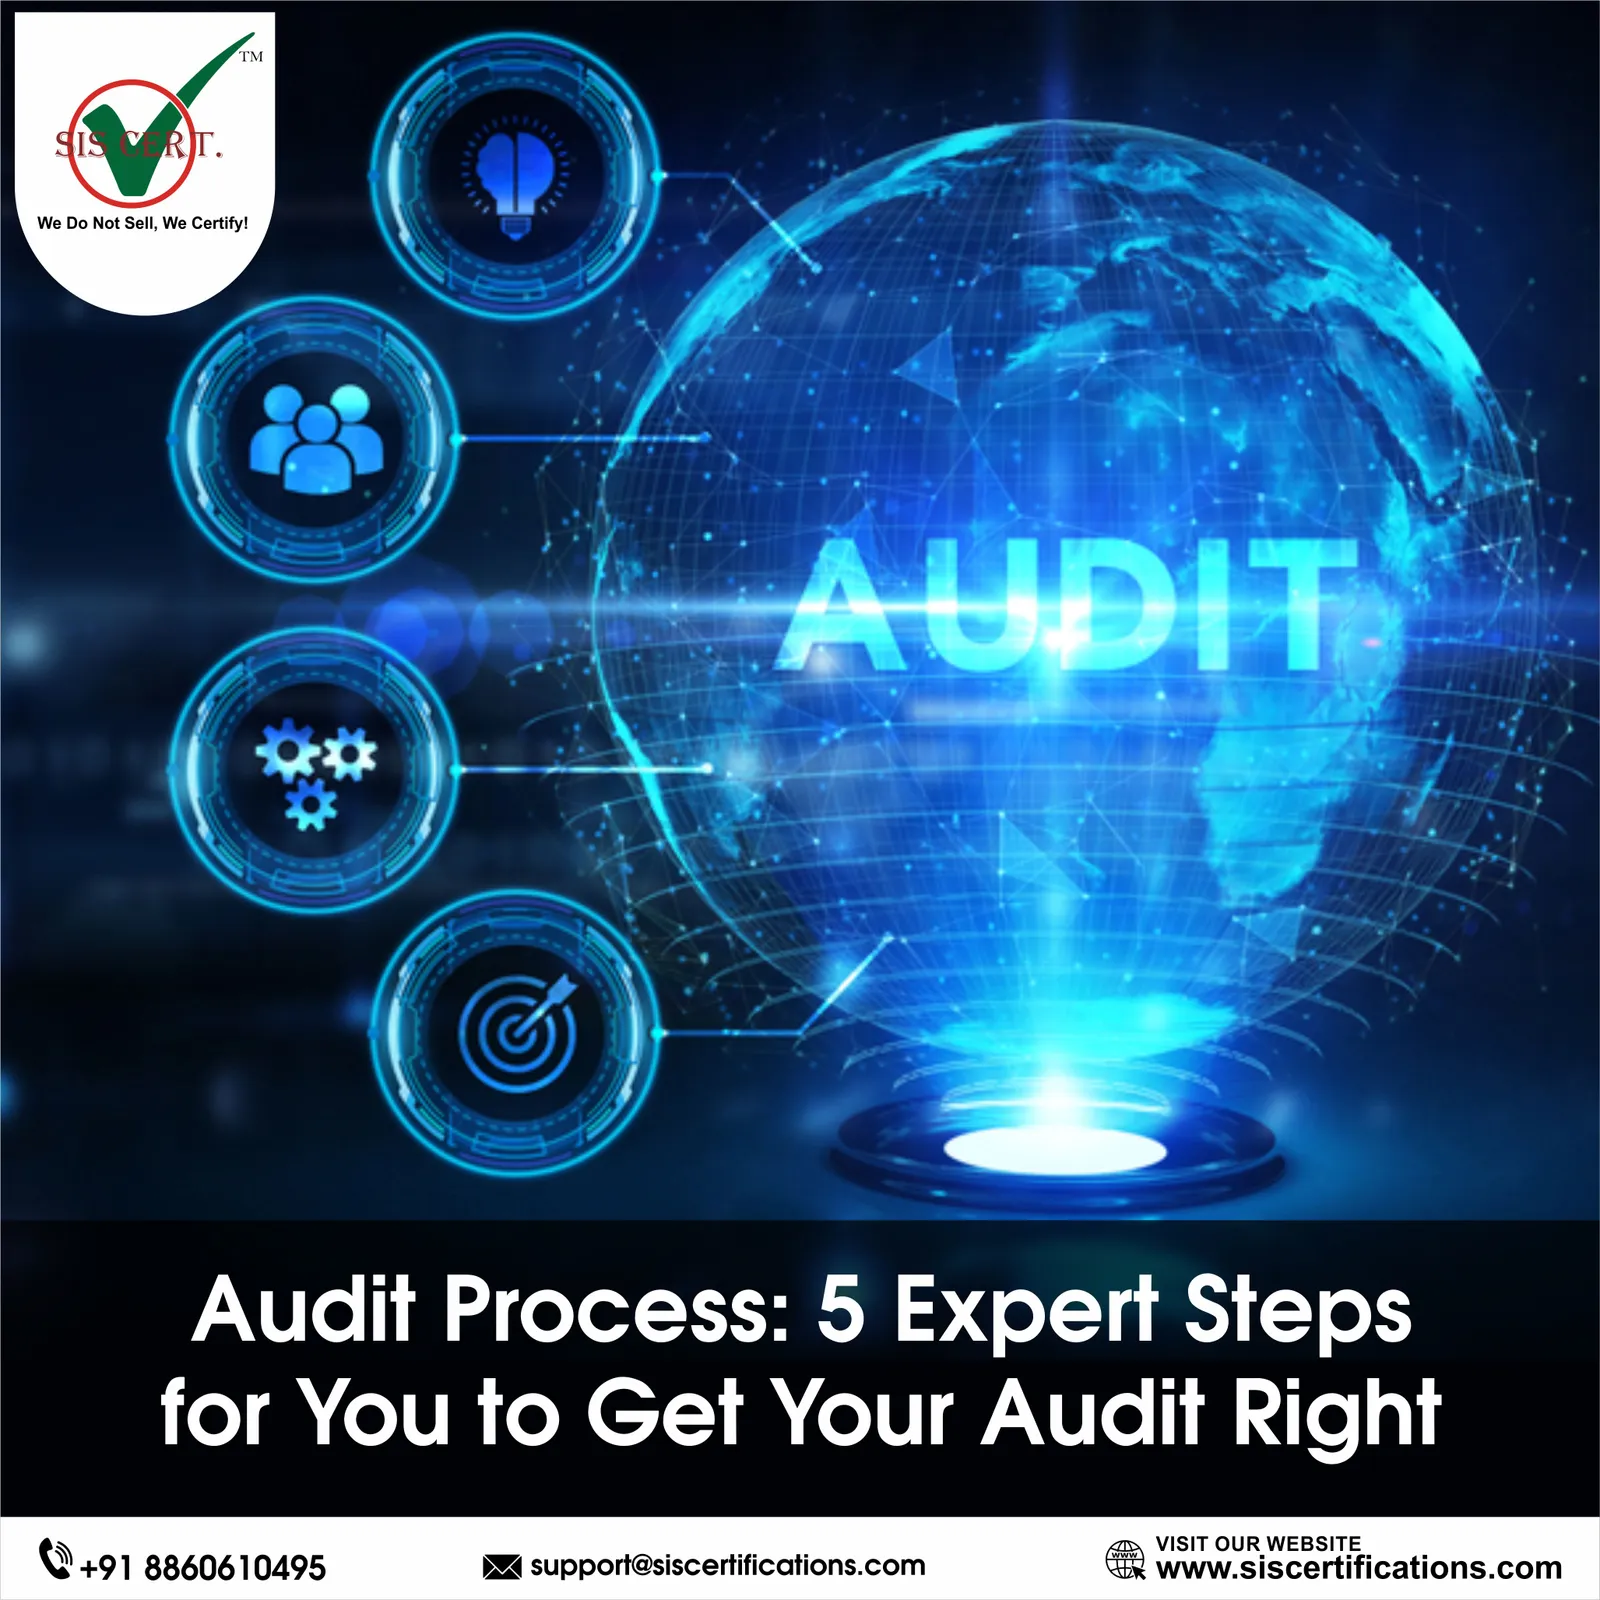 Audit Process: 5 Expert Steps for You to Get Your Audit Right